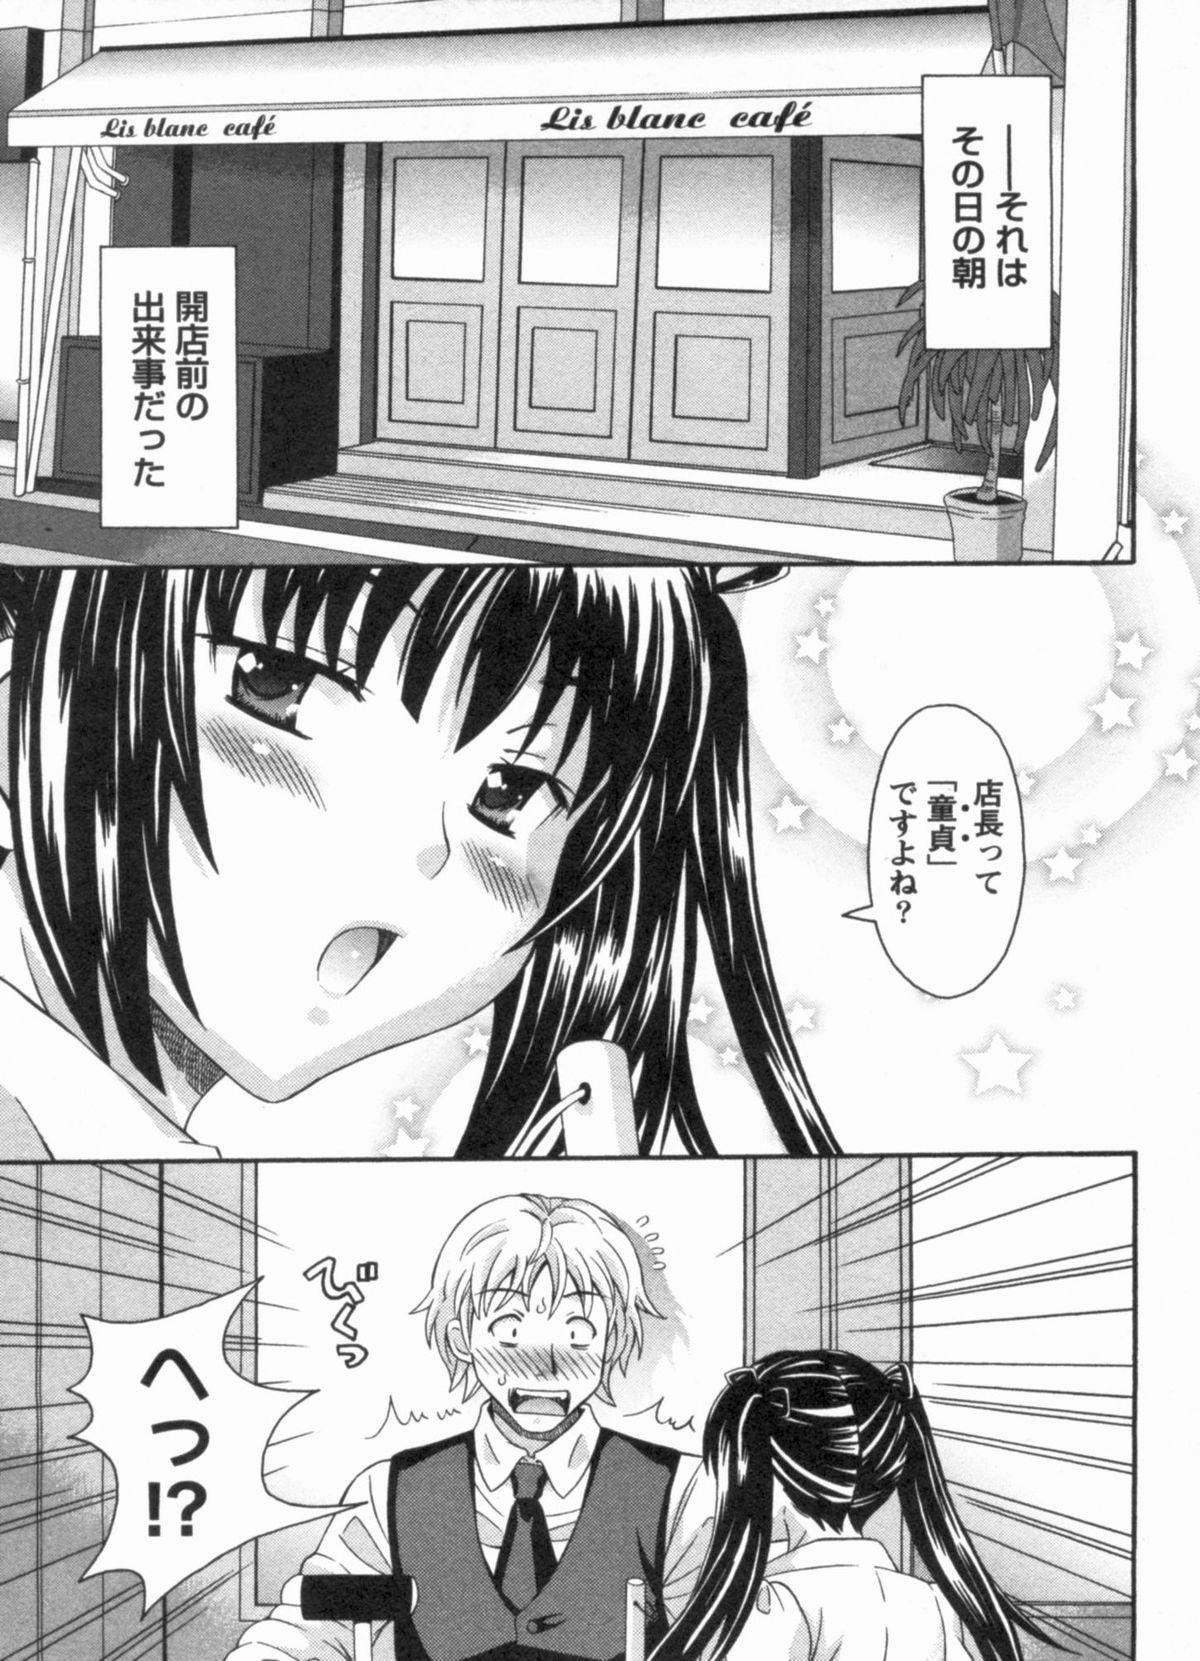 Asses Koi Cafe ni Youkoso!! 1 - Welcome to Love&cafe!! 1 Gaysex - Page 11